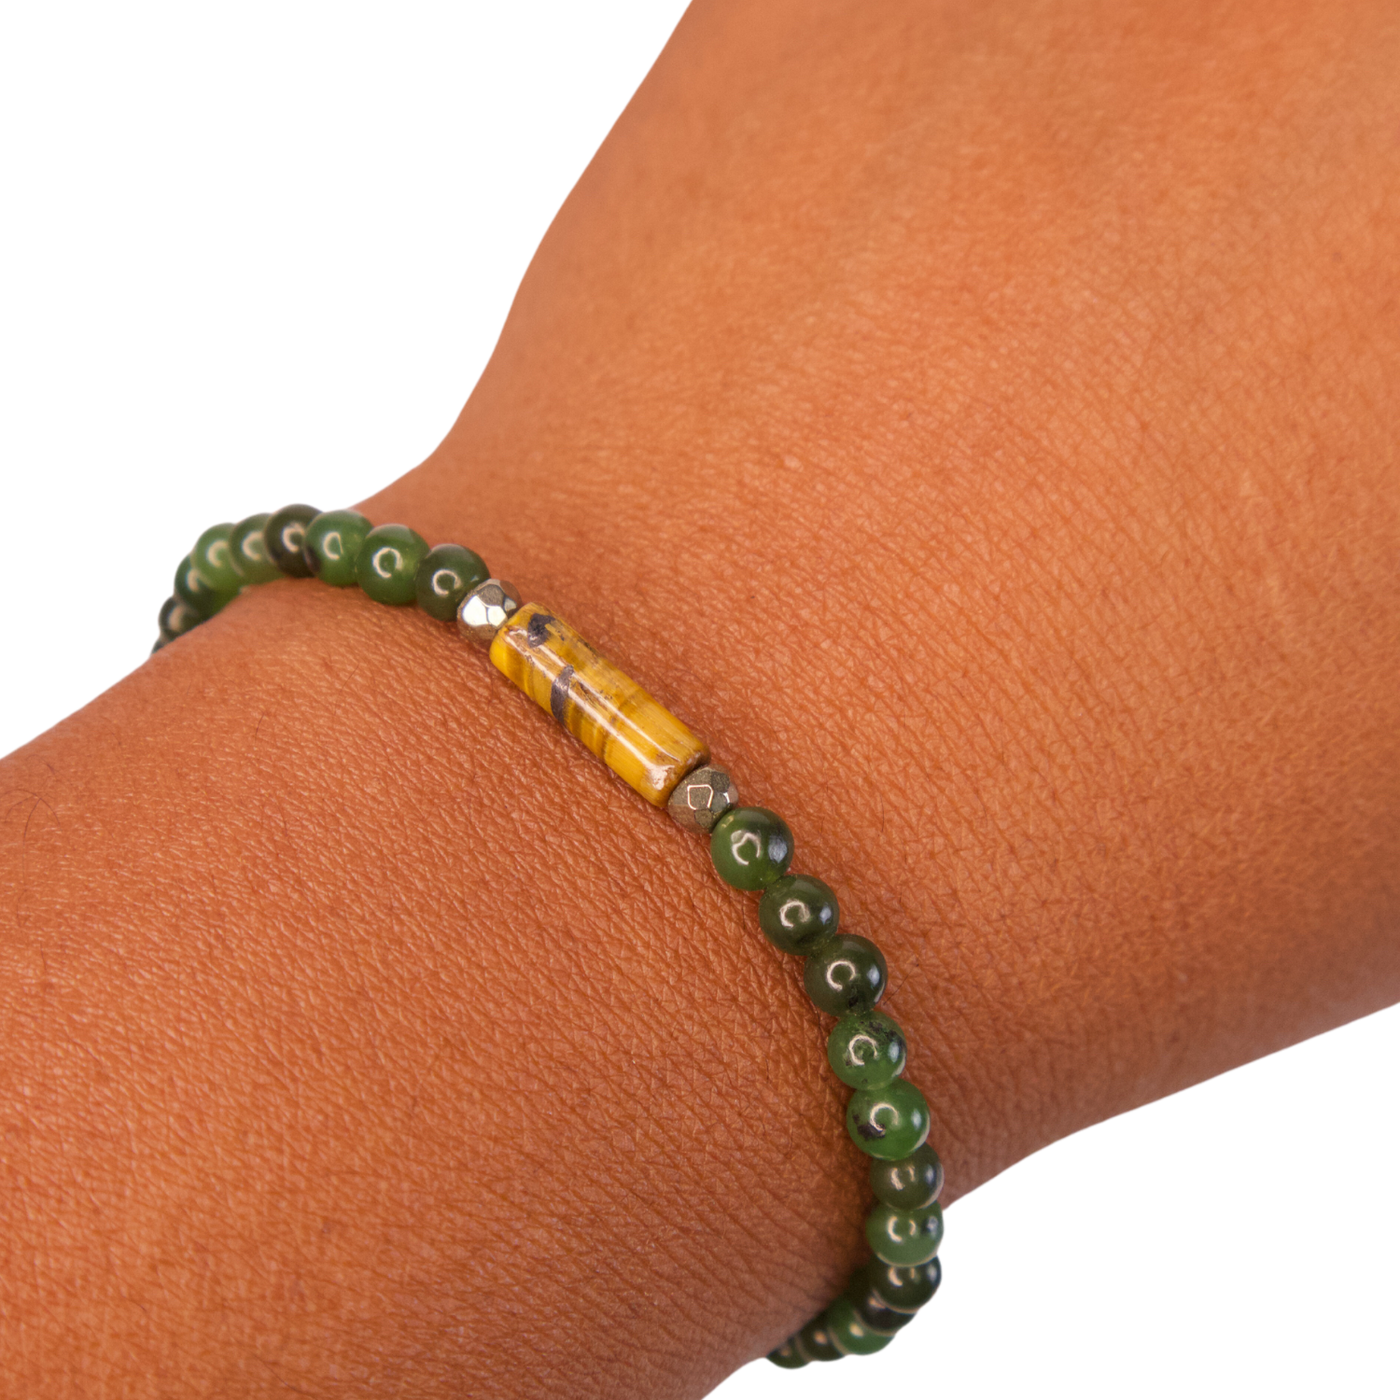 Close up view of Black woman's wrist wearing a Jade, Tiger's Eye and Pyrite Financial Advisor Bracelet by Energy Muse